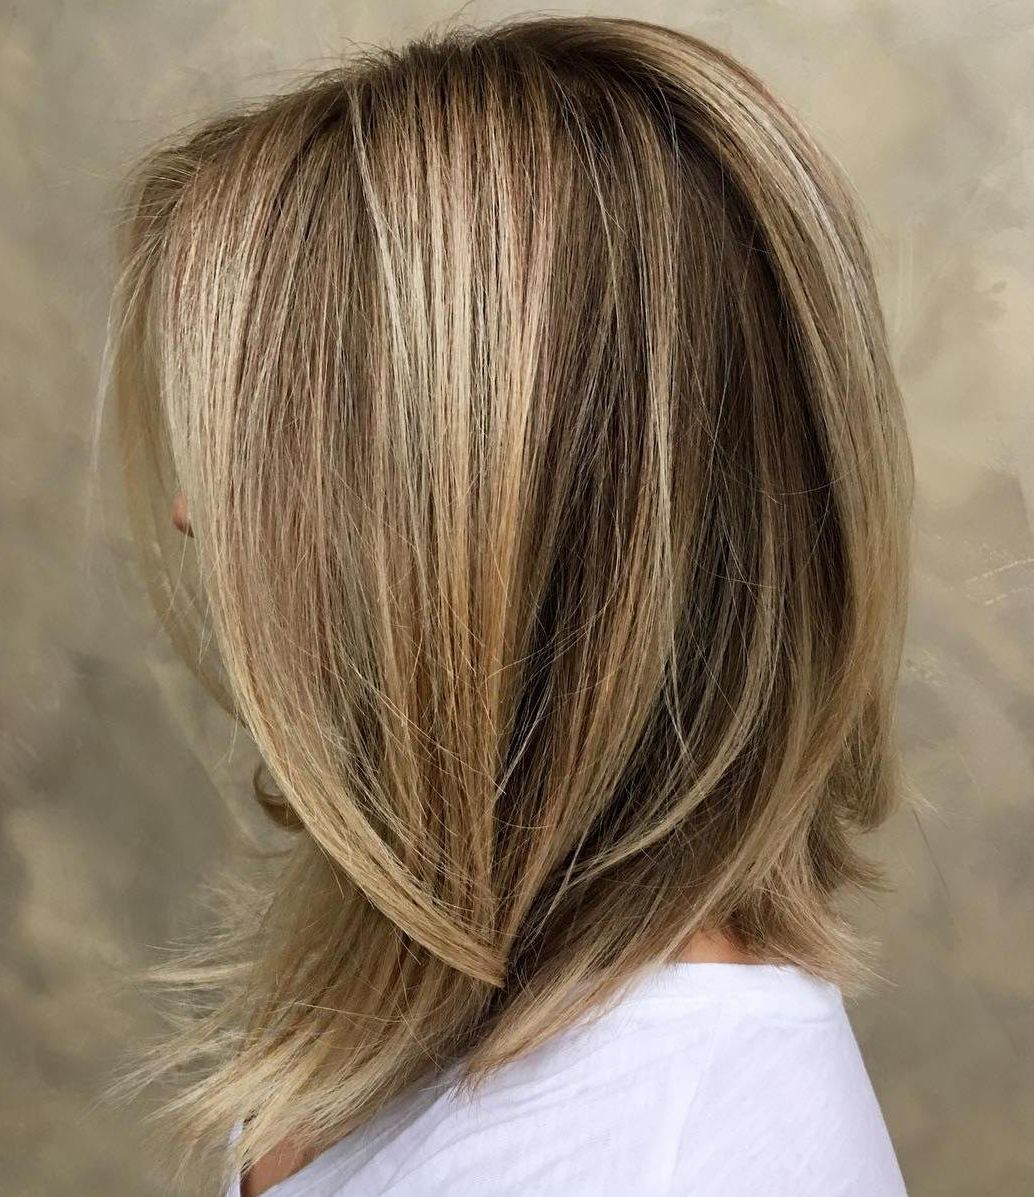 60 Inspiring Long Bob Hairstyles And Lob Haircuts 2018 With Regard To Stacked Copper Balayage Bob Hairstyles (View 11 of 20)